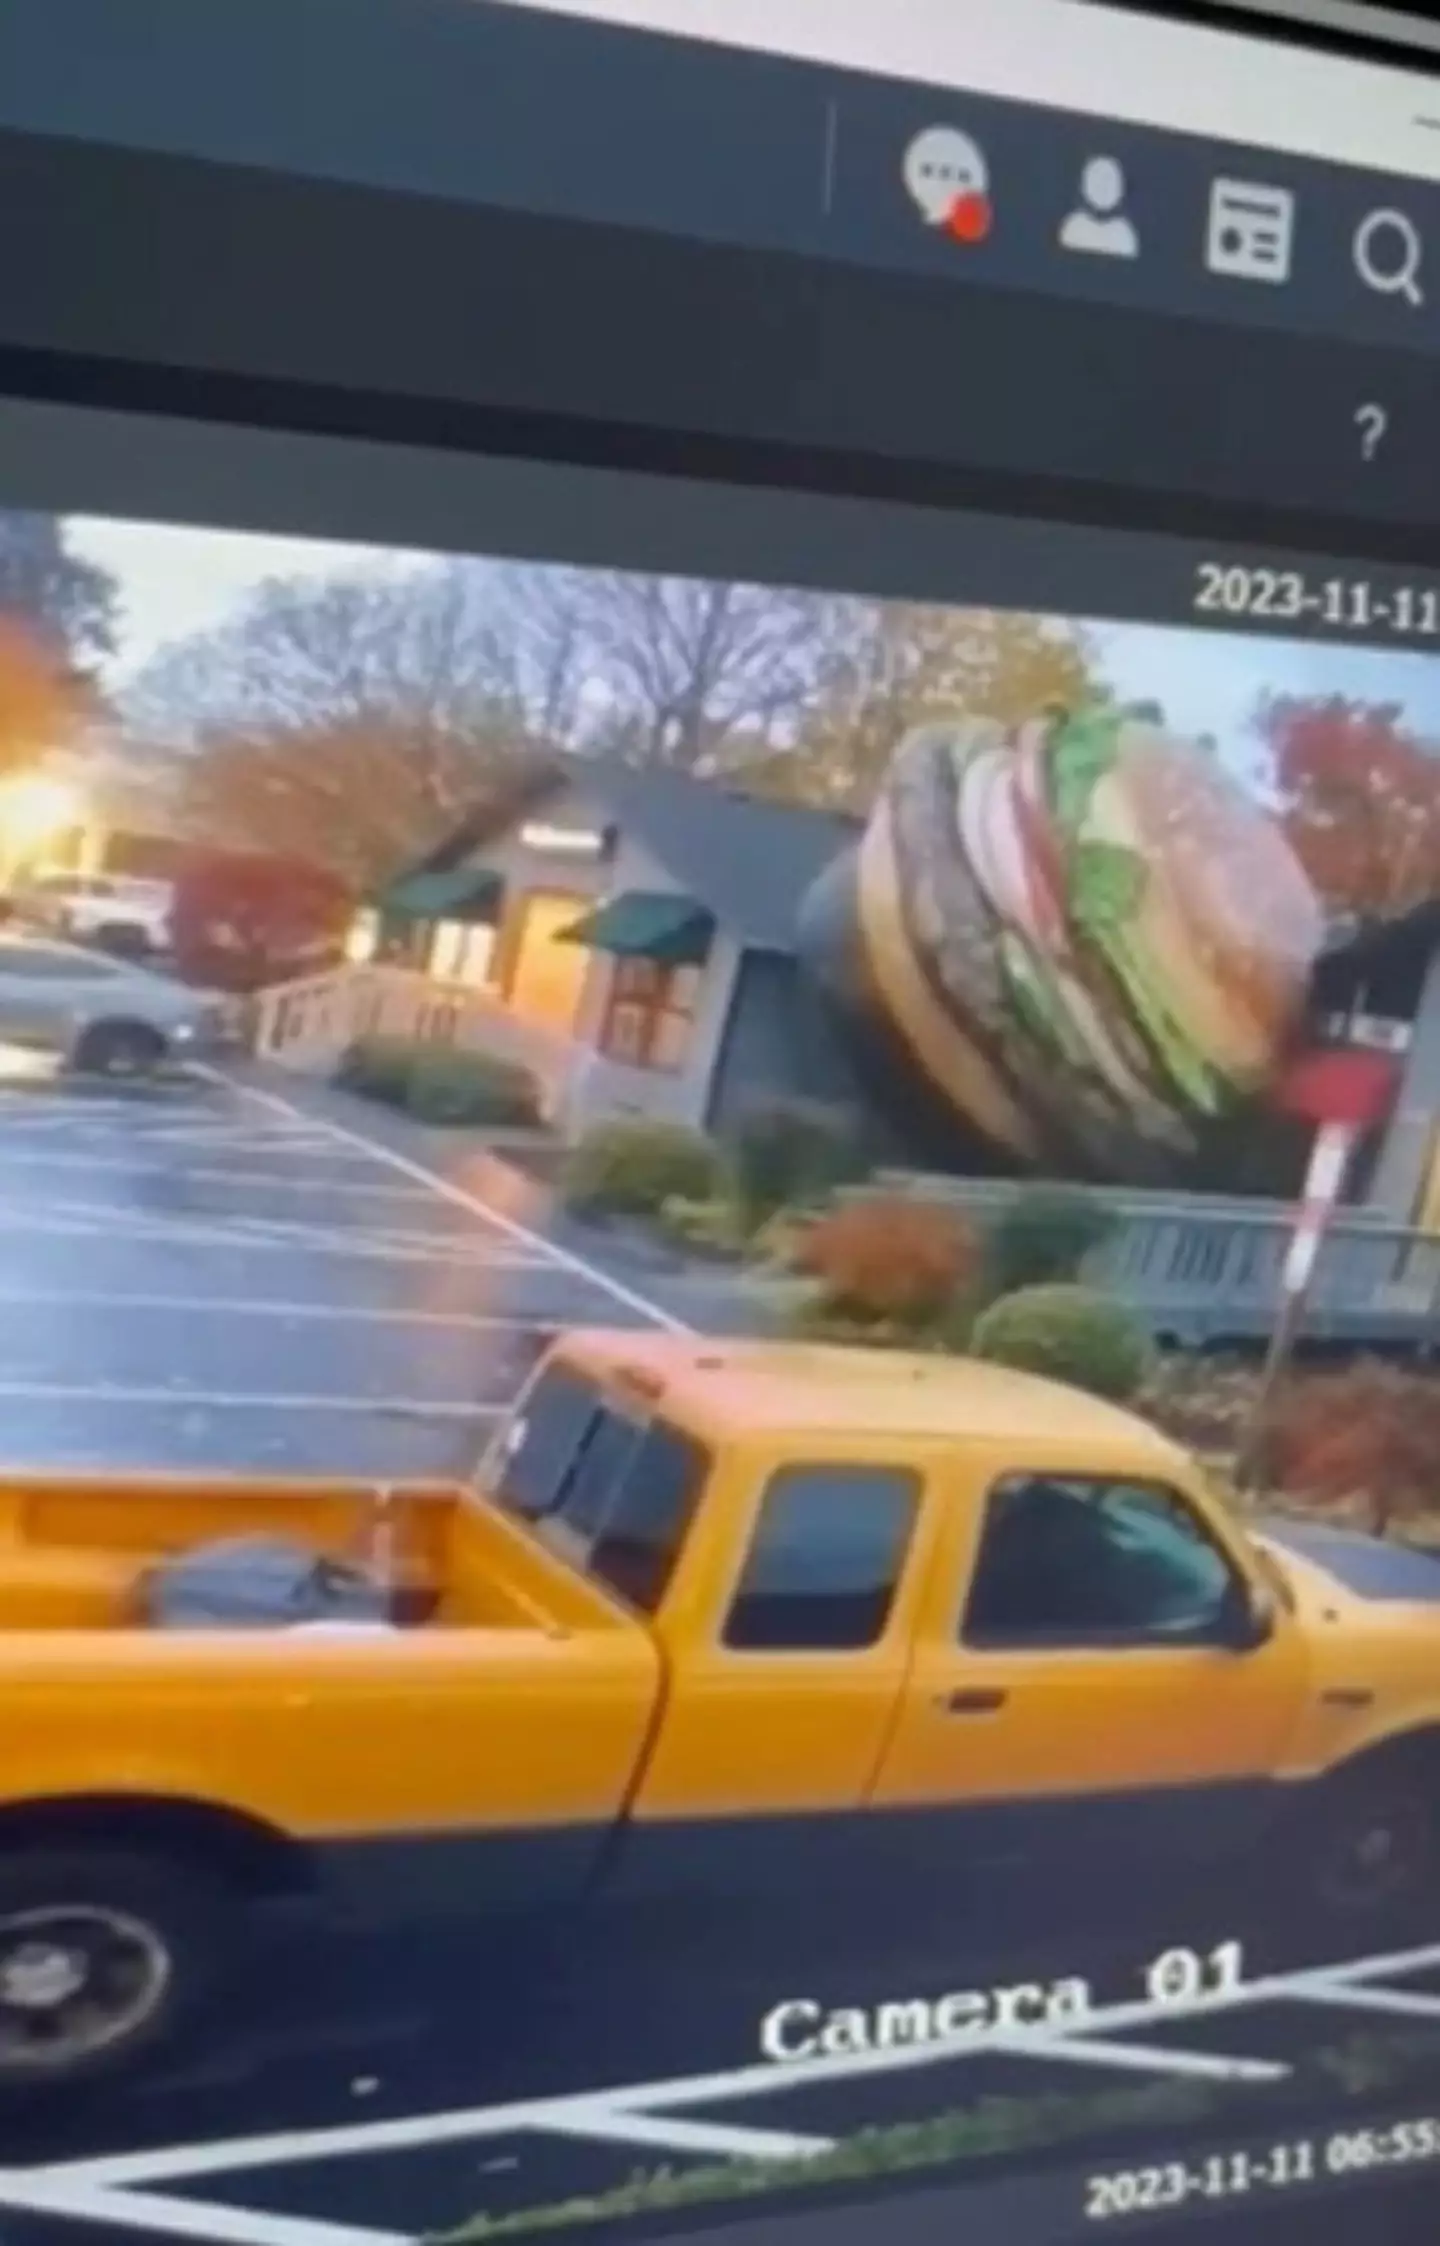 The burger briefly came to rest by a building before being blown away.